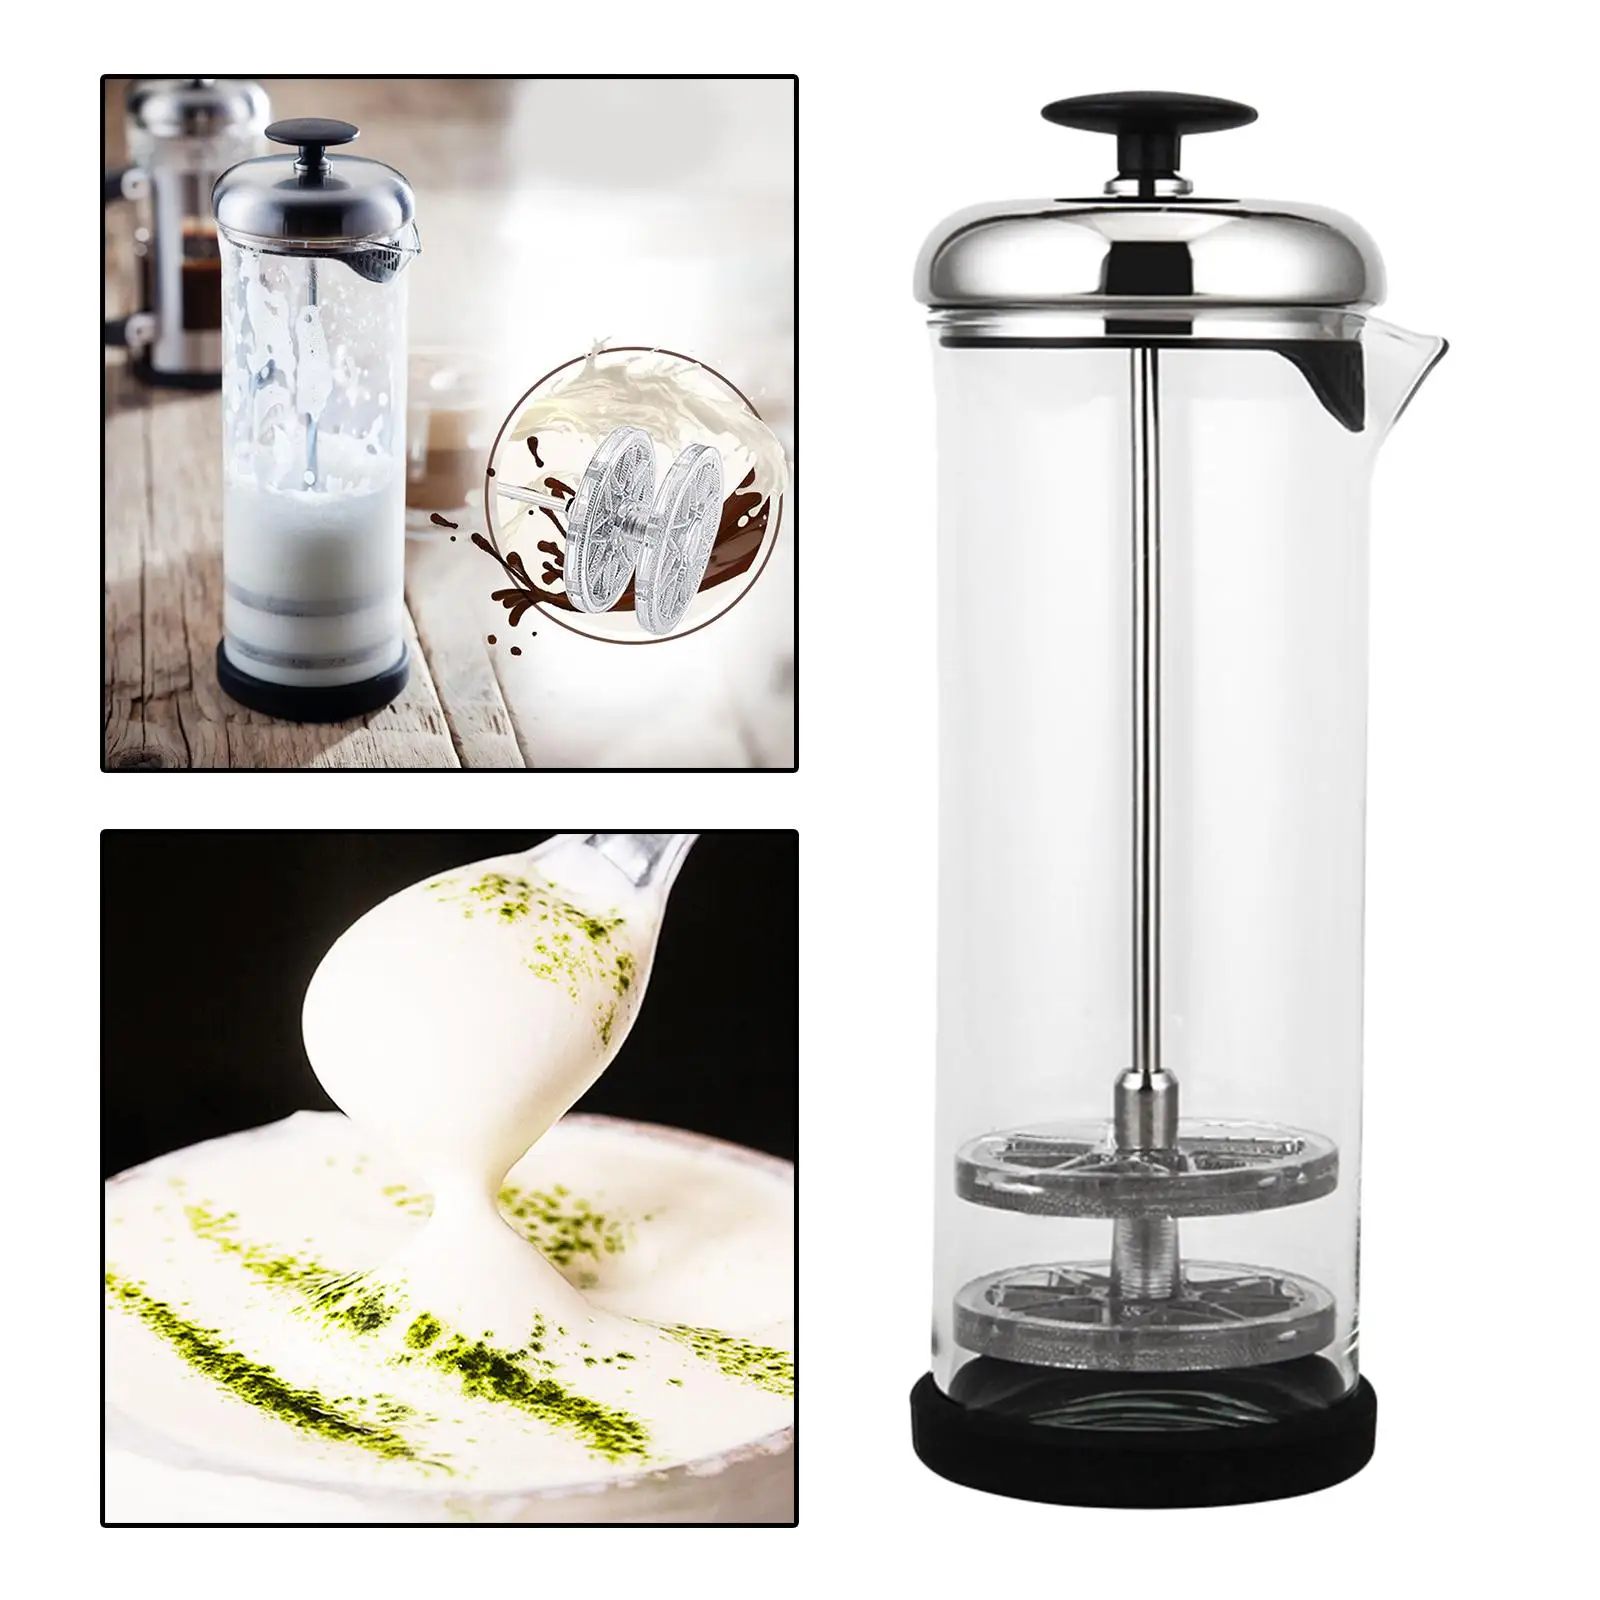 Milk Frother, 400ML Stainless Steel Manual Milk Frother Double Mesh Foam Mixer for Coffee, Latte, Coffee (400ml)